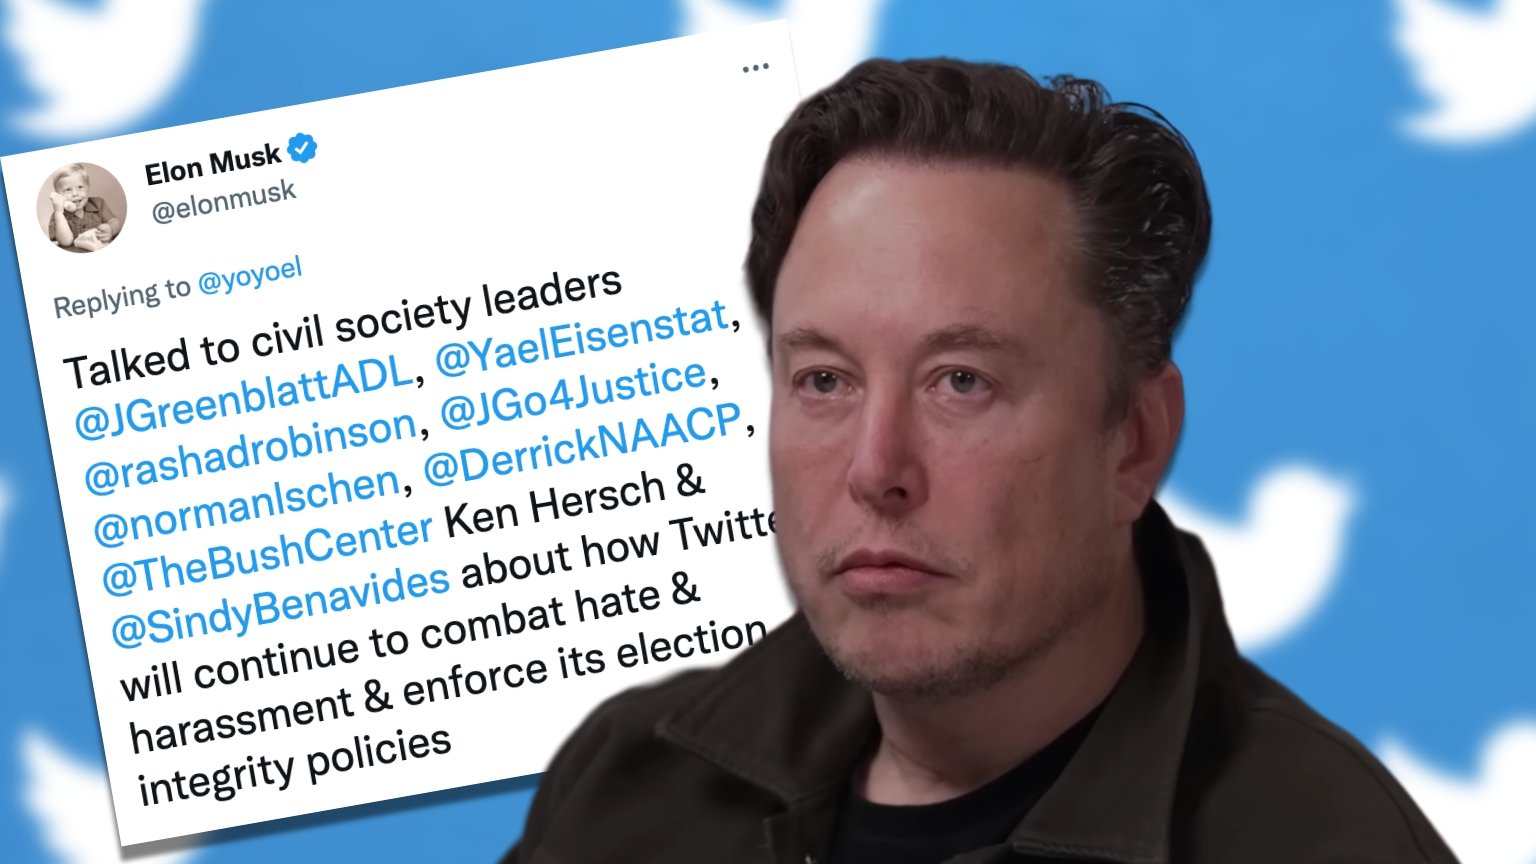 Elon Musk consults with ADL and other pressure groups on combatting “hate” and preserving “election integrity”